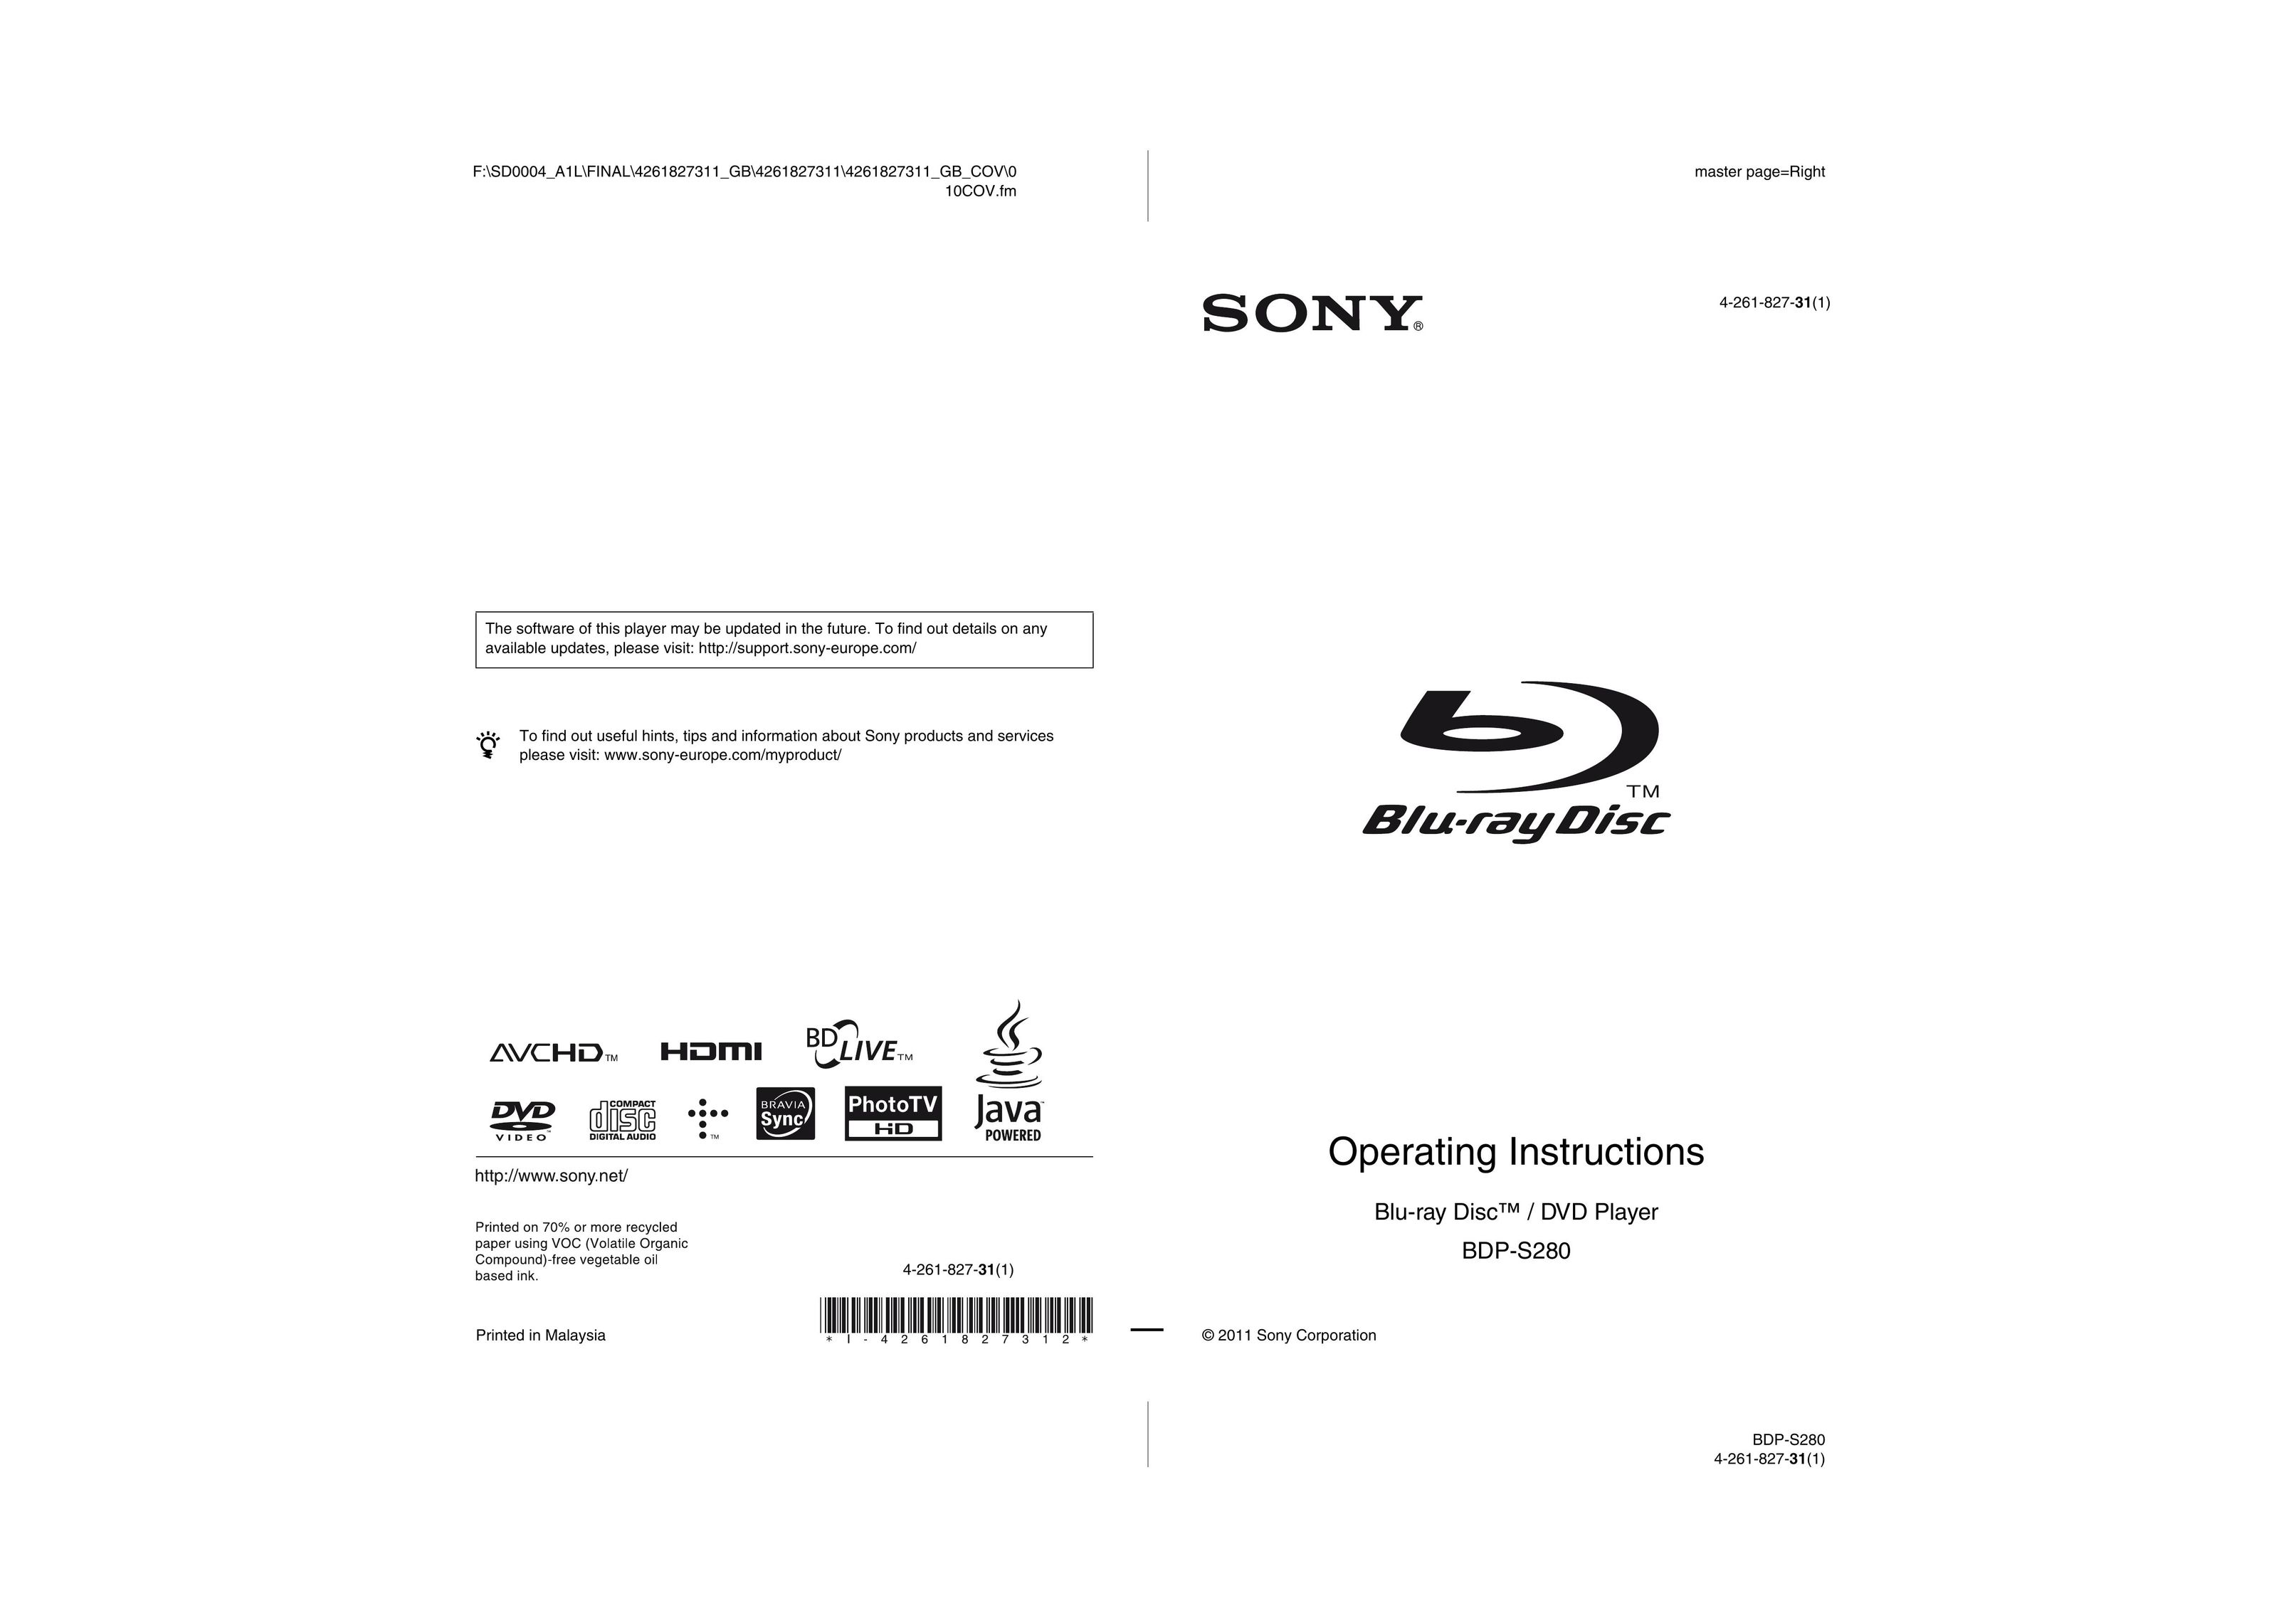 Sony BDP-S280 DVD Player User Manual